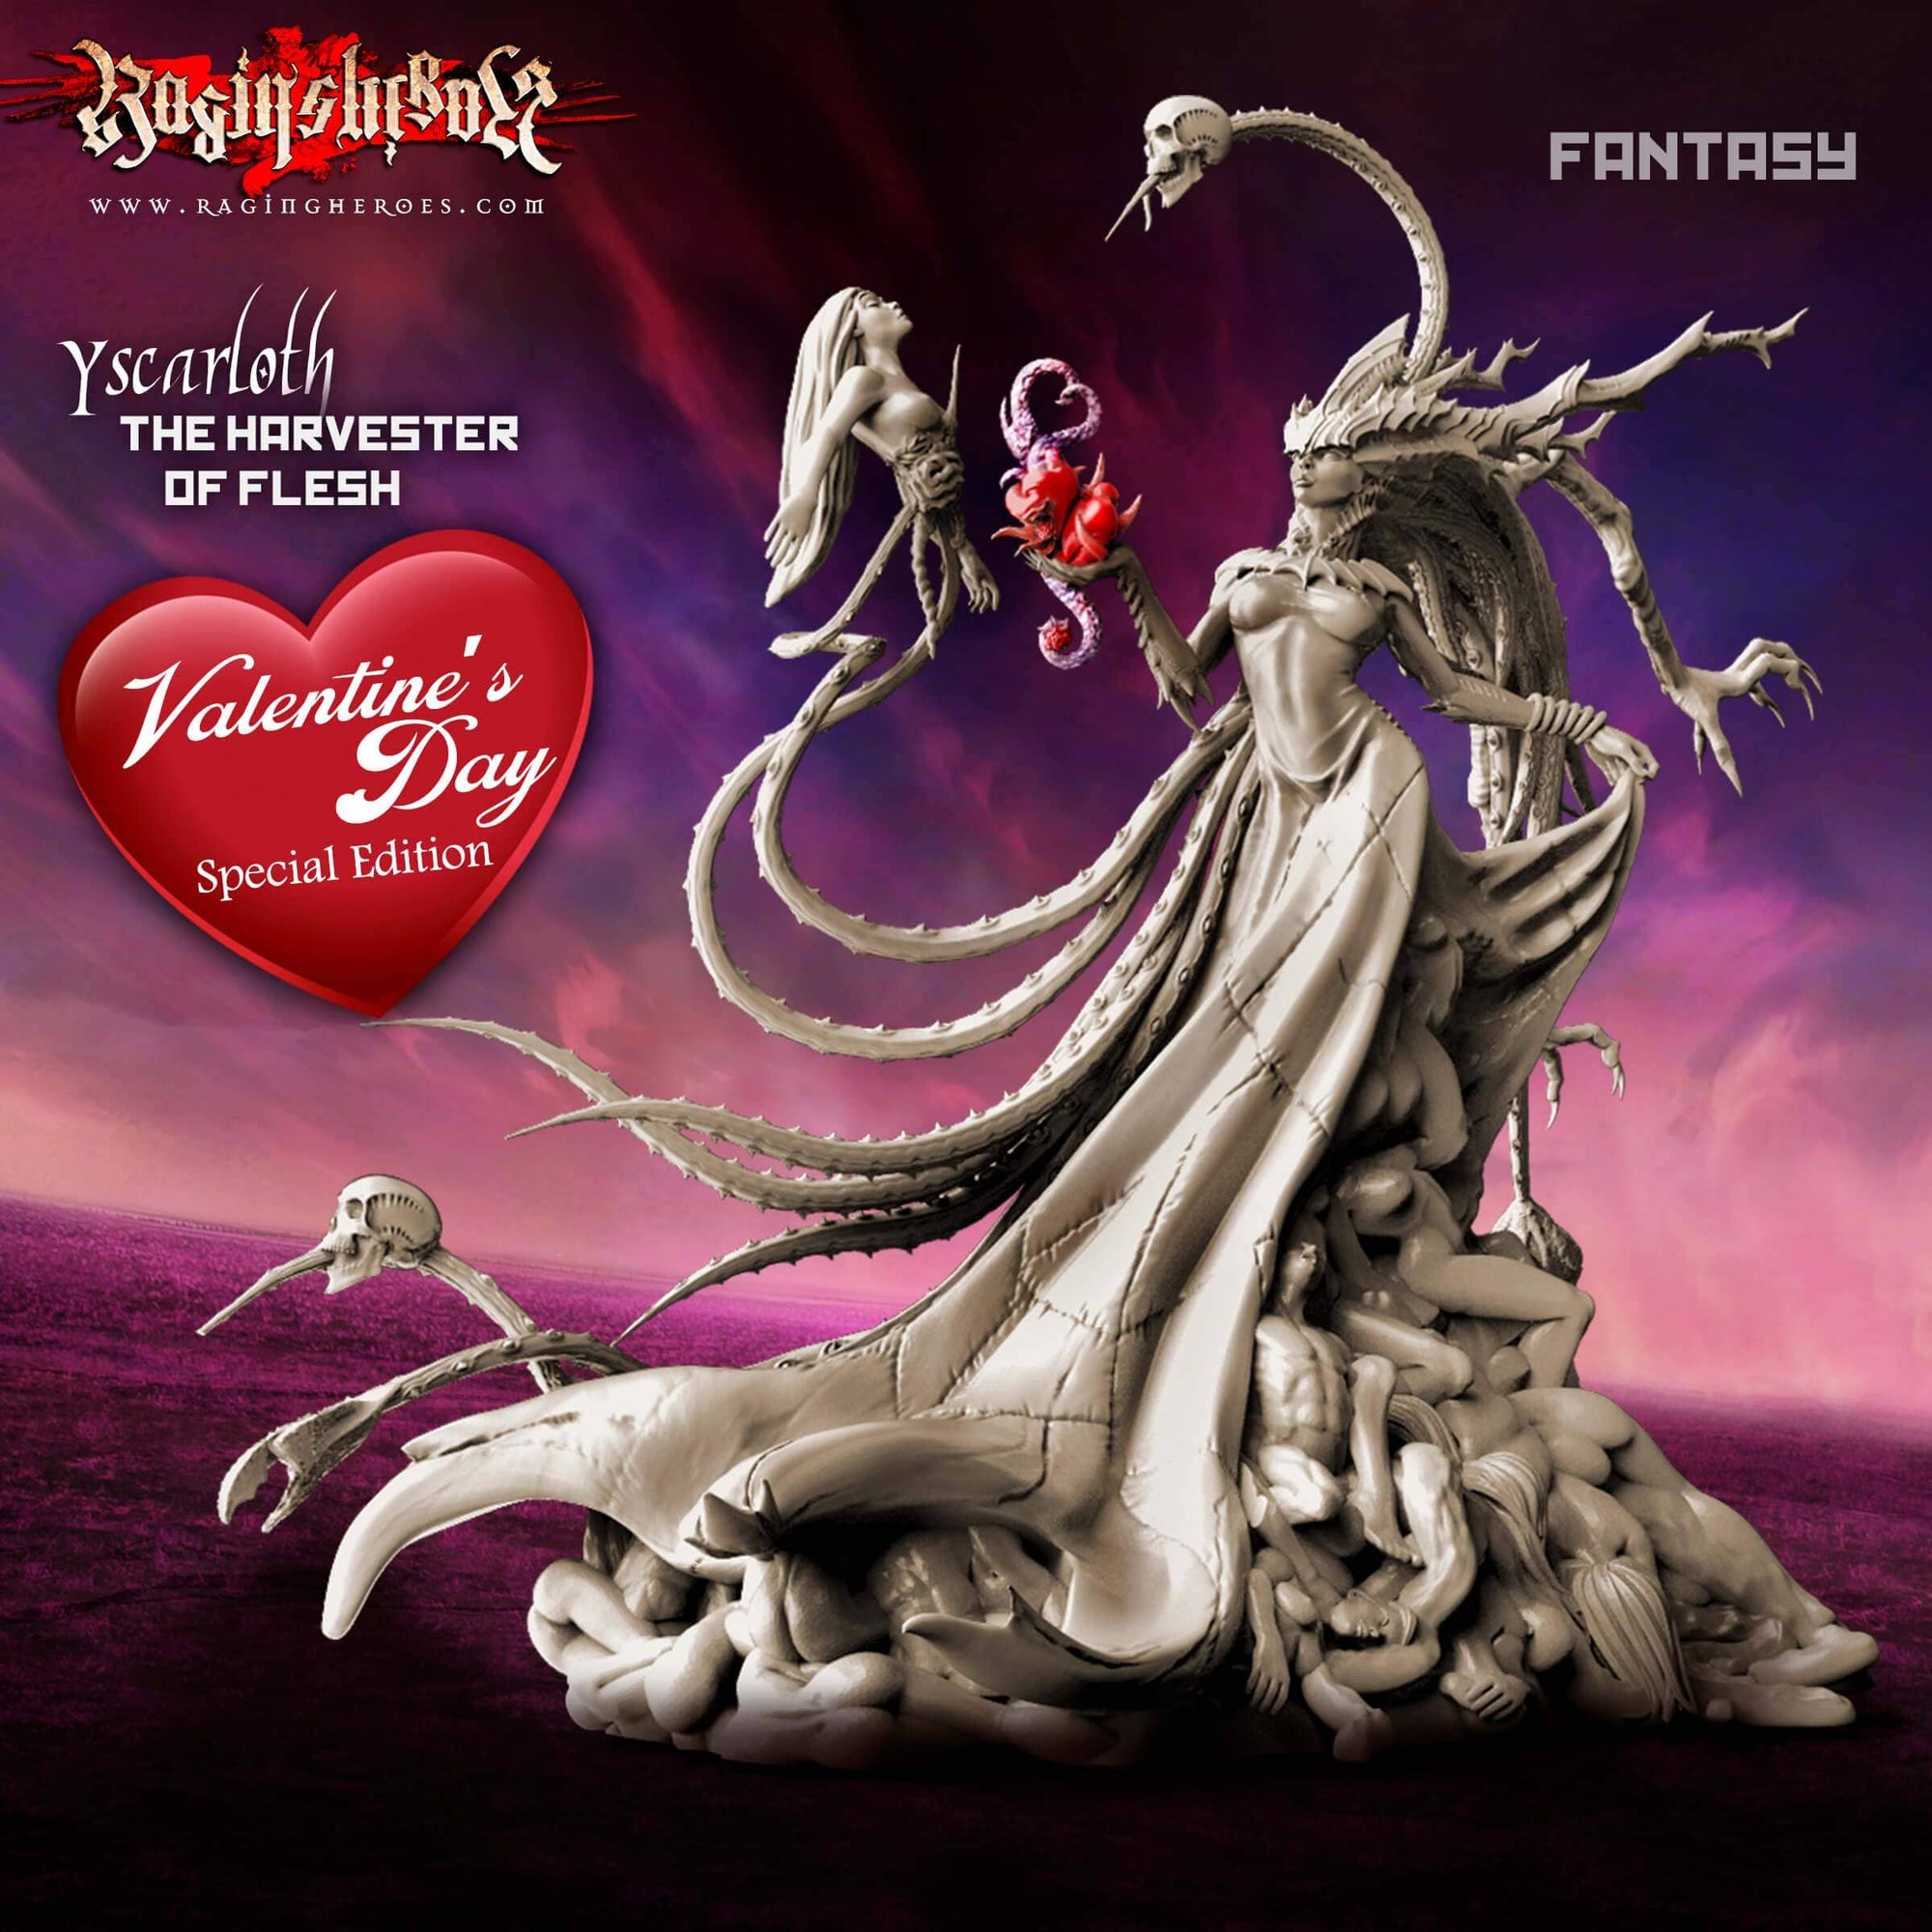 Yscarloth, The Harvester of Flesh, Valentine's Day Special Edition Fantasy Version (Le - F)